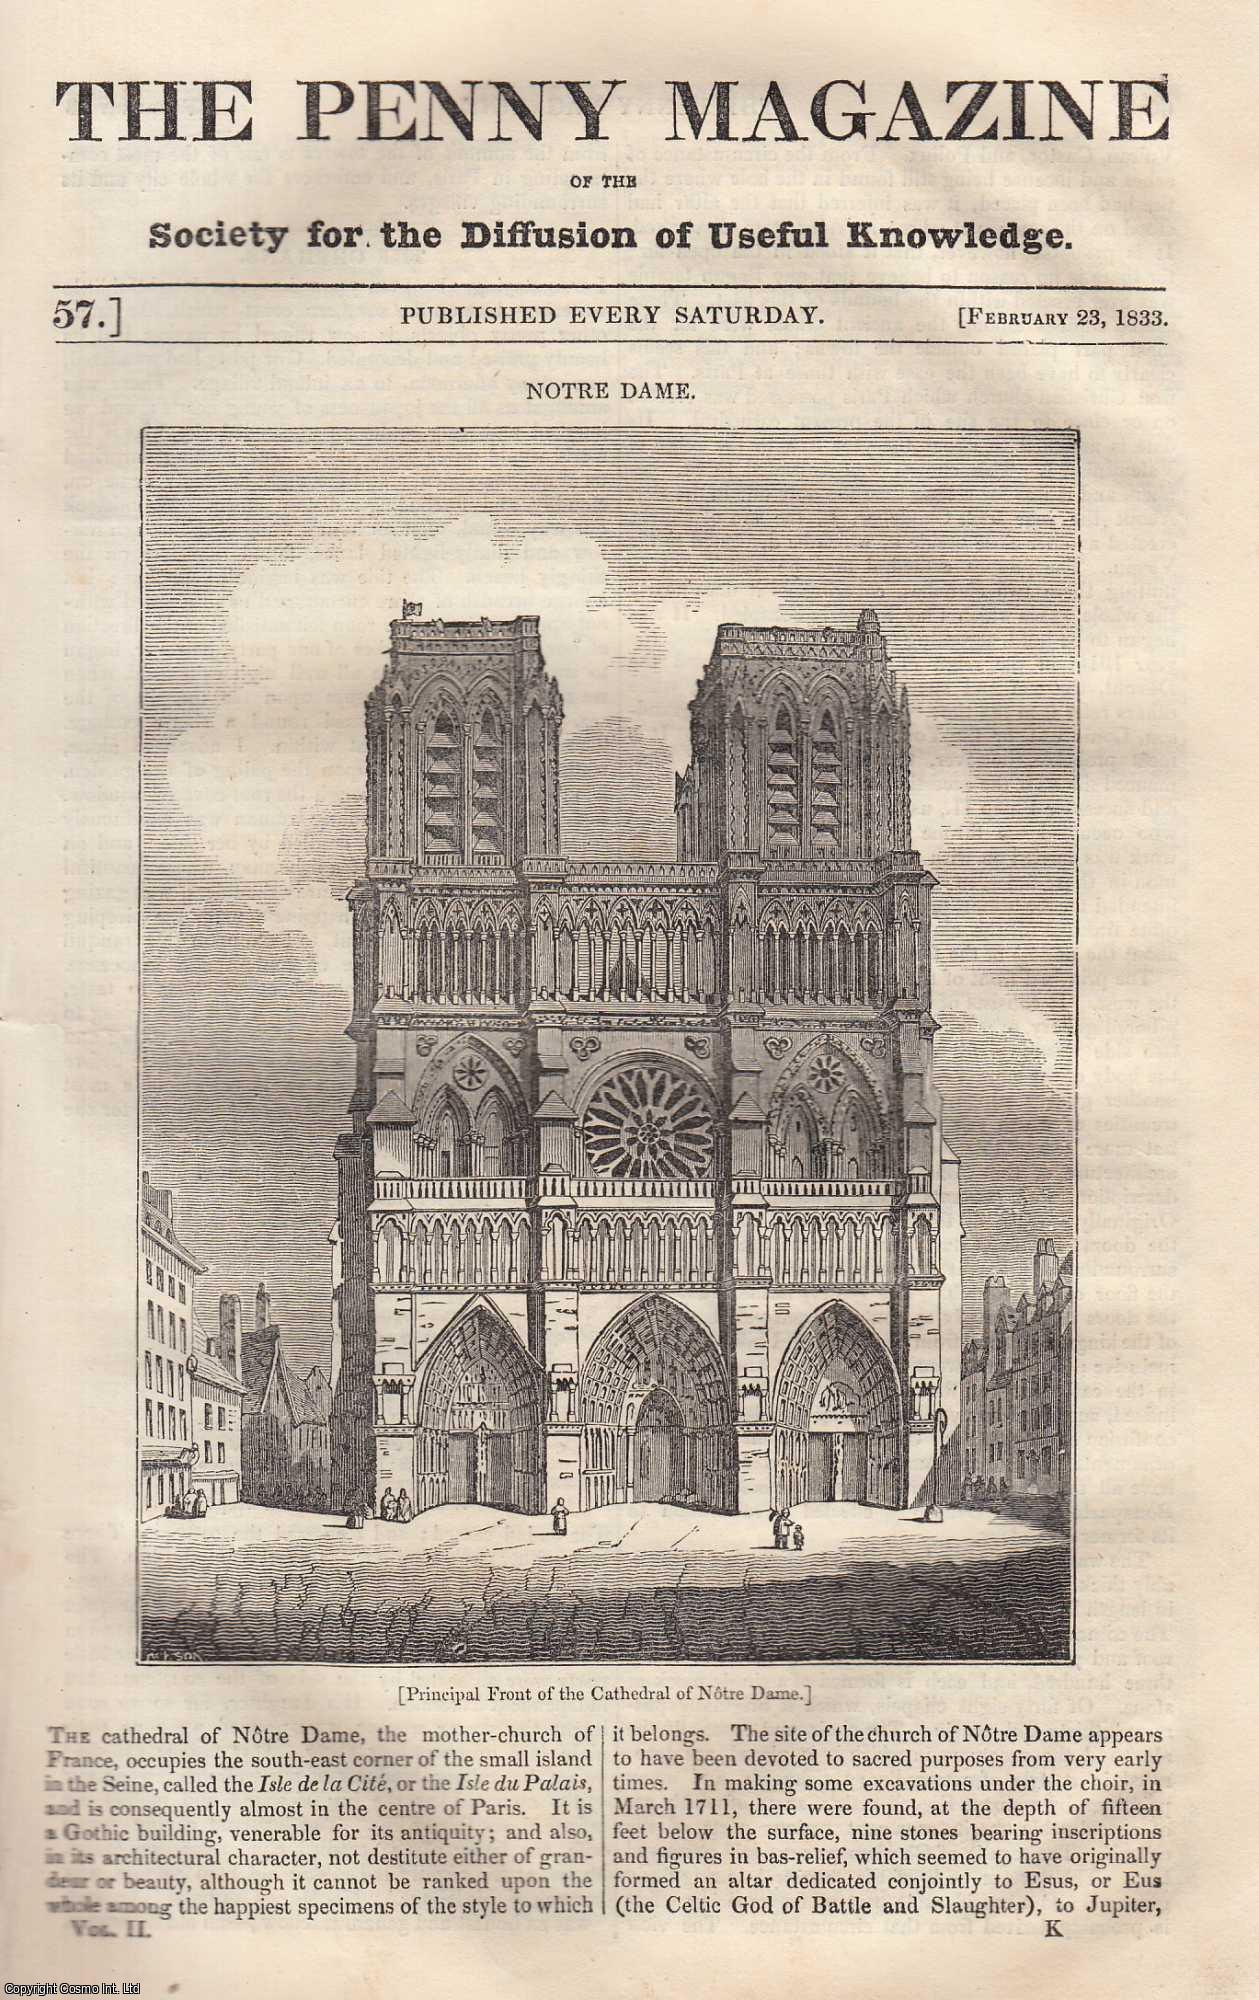 Penny Magazine - The Cathedral of Notre Dame; George Frederic Handel (composer); The Castle of Ehrenbreitstein (Germany); The Hottentots, etc. Issue No. 57, February 23rd, 1833. A complete original weekly issue of the Penny Magazine, 1833.